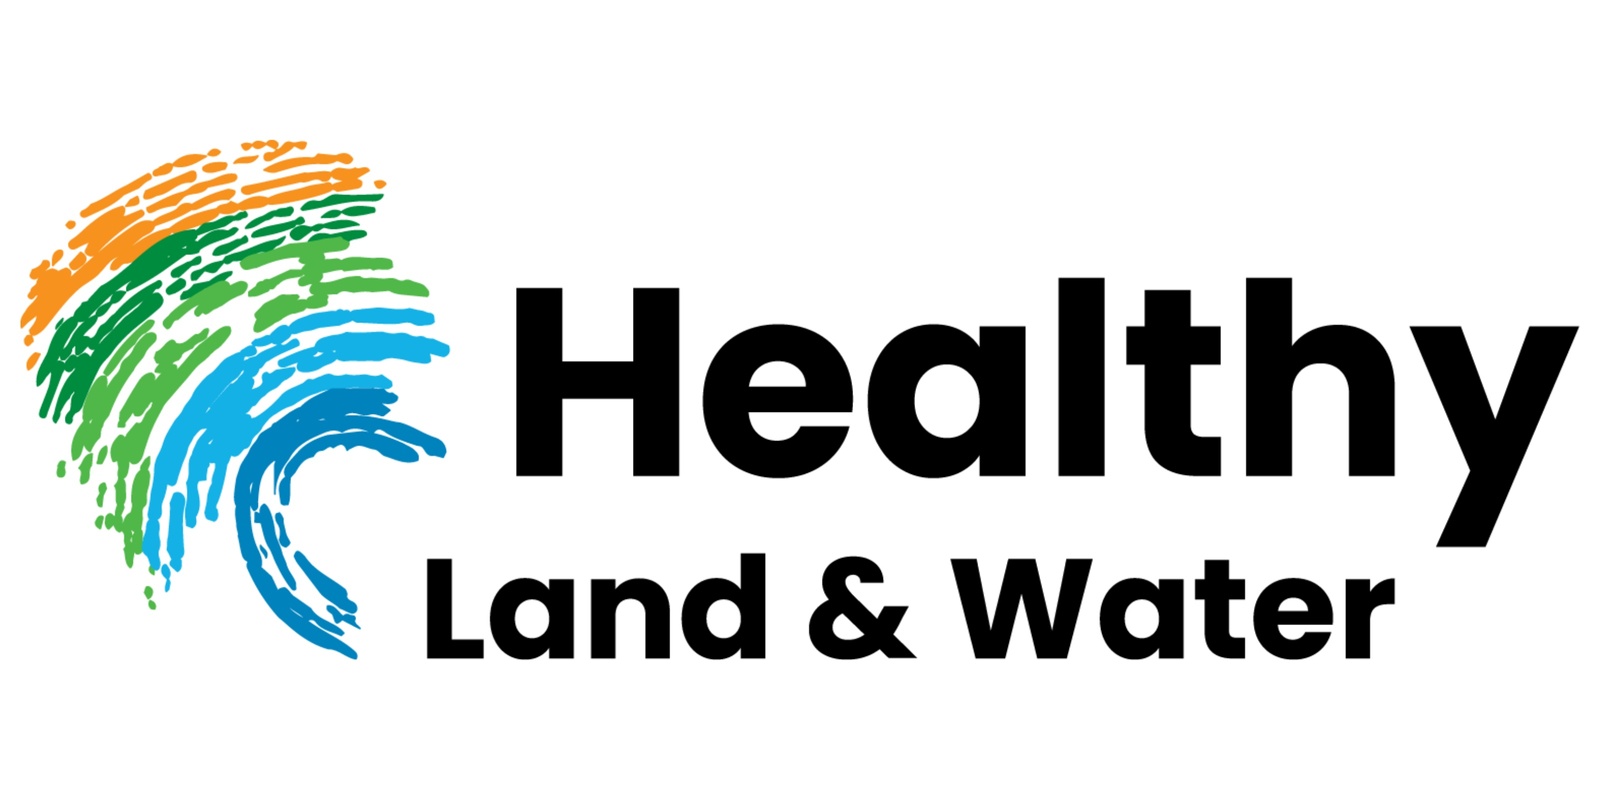 Healthy Land & Water's banner